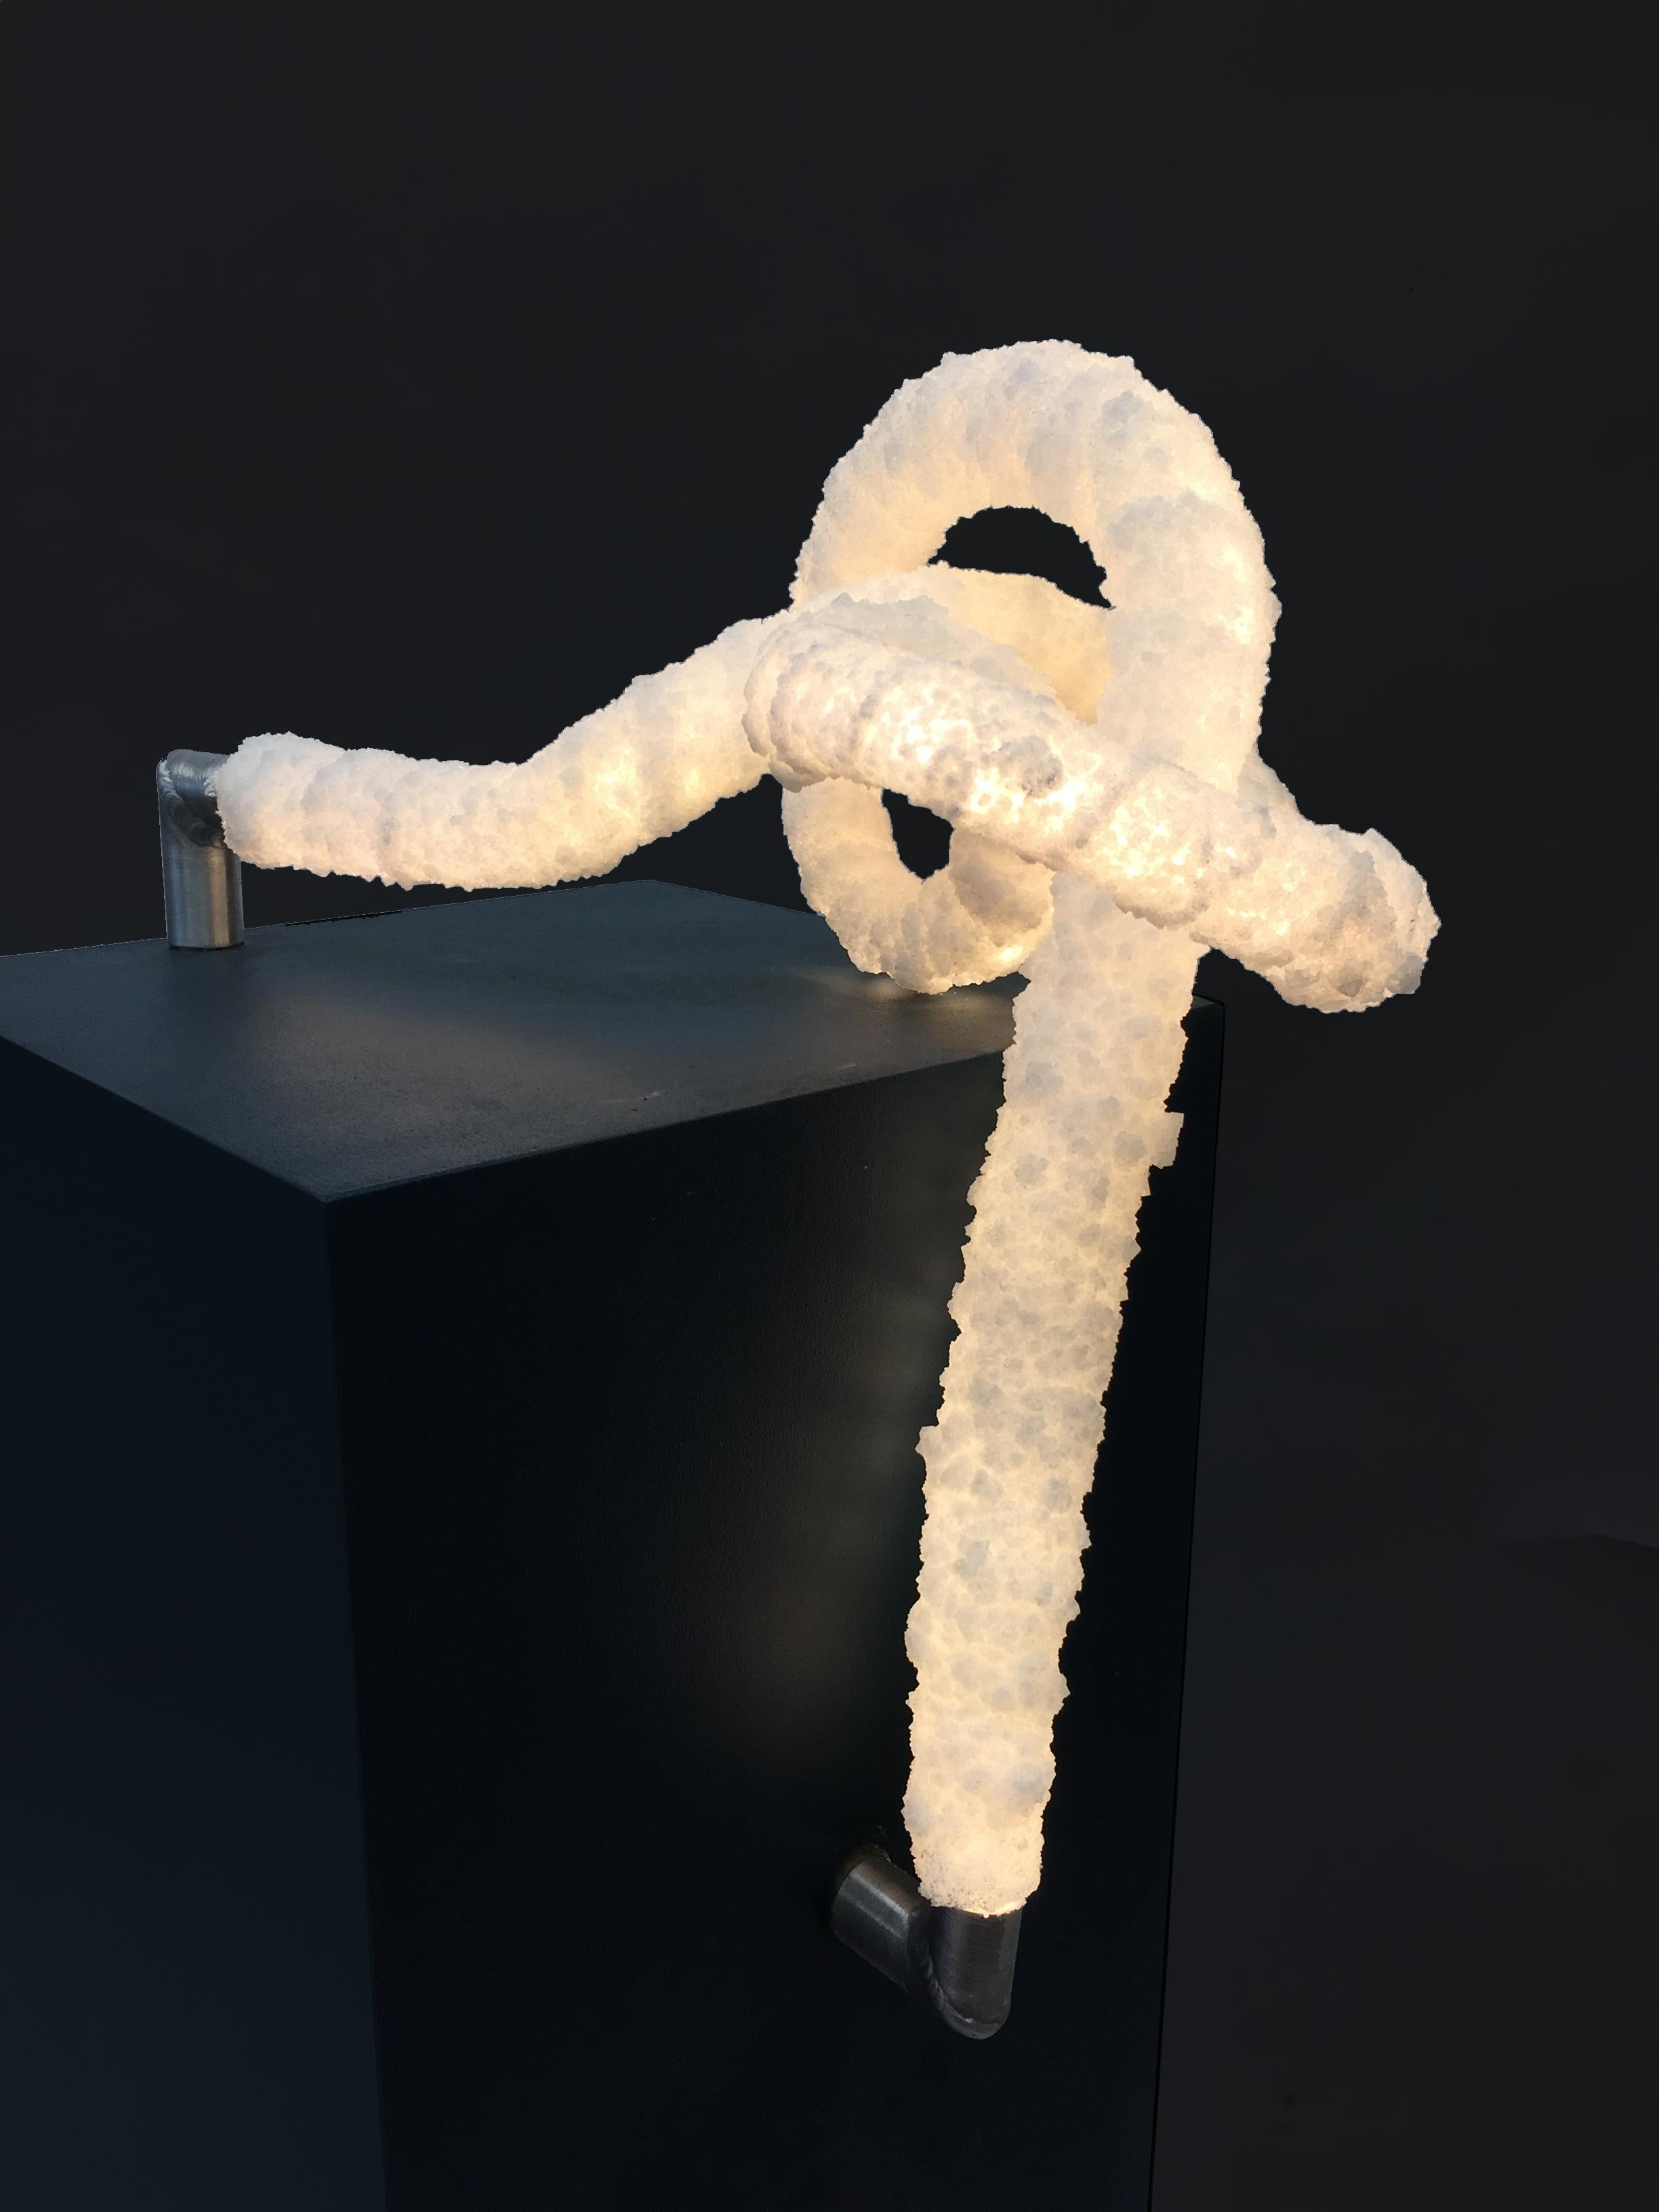 The Crystal Knot is a light object. The shape of the light object is inspired by the biological phenomenon of protein folding. With this project, I continue my research for the boundaries of art and sciences and where these two subjects can possibly